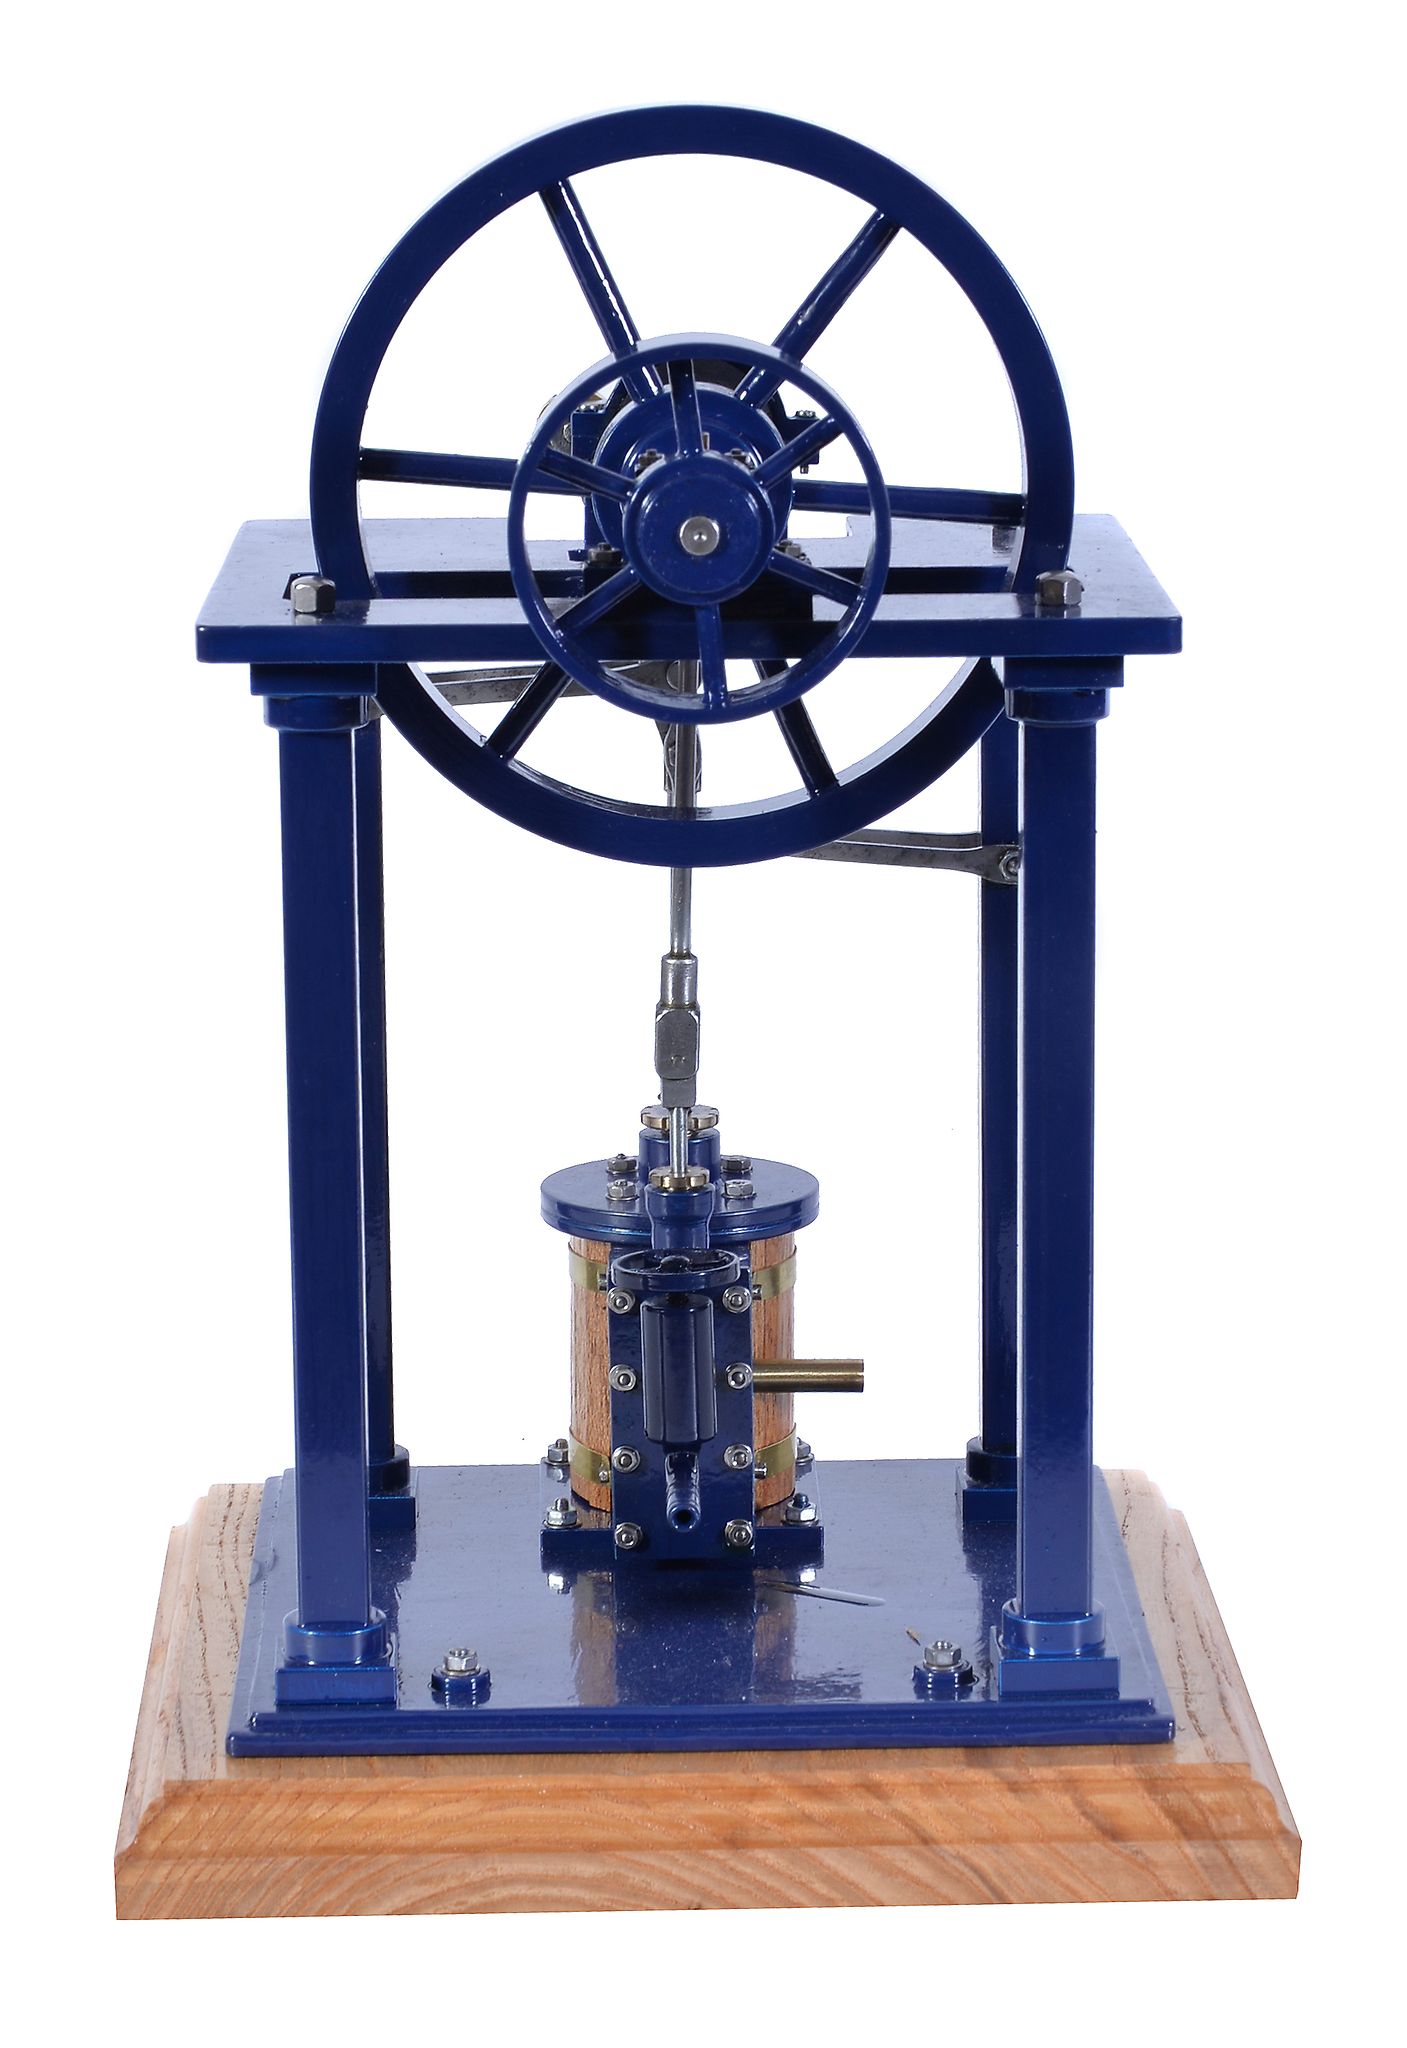 A well-engineered model of an over-type vertical live steam mill engine, built by Mr D. Russell of - Image 3 of 3